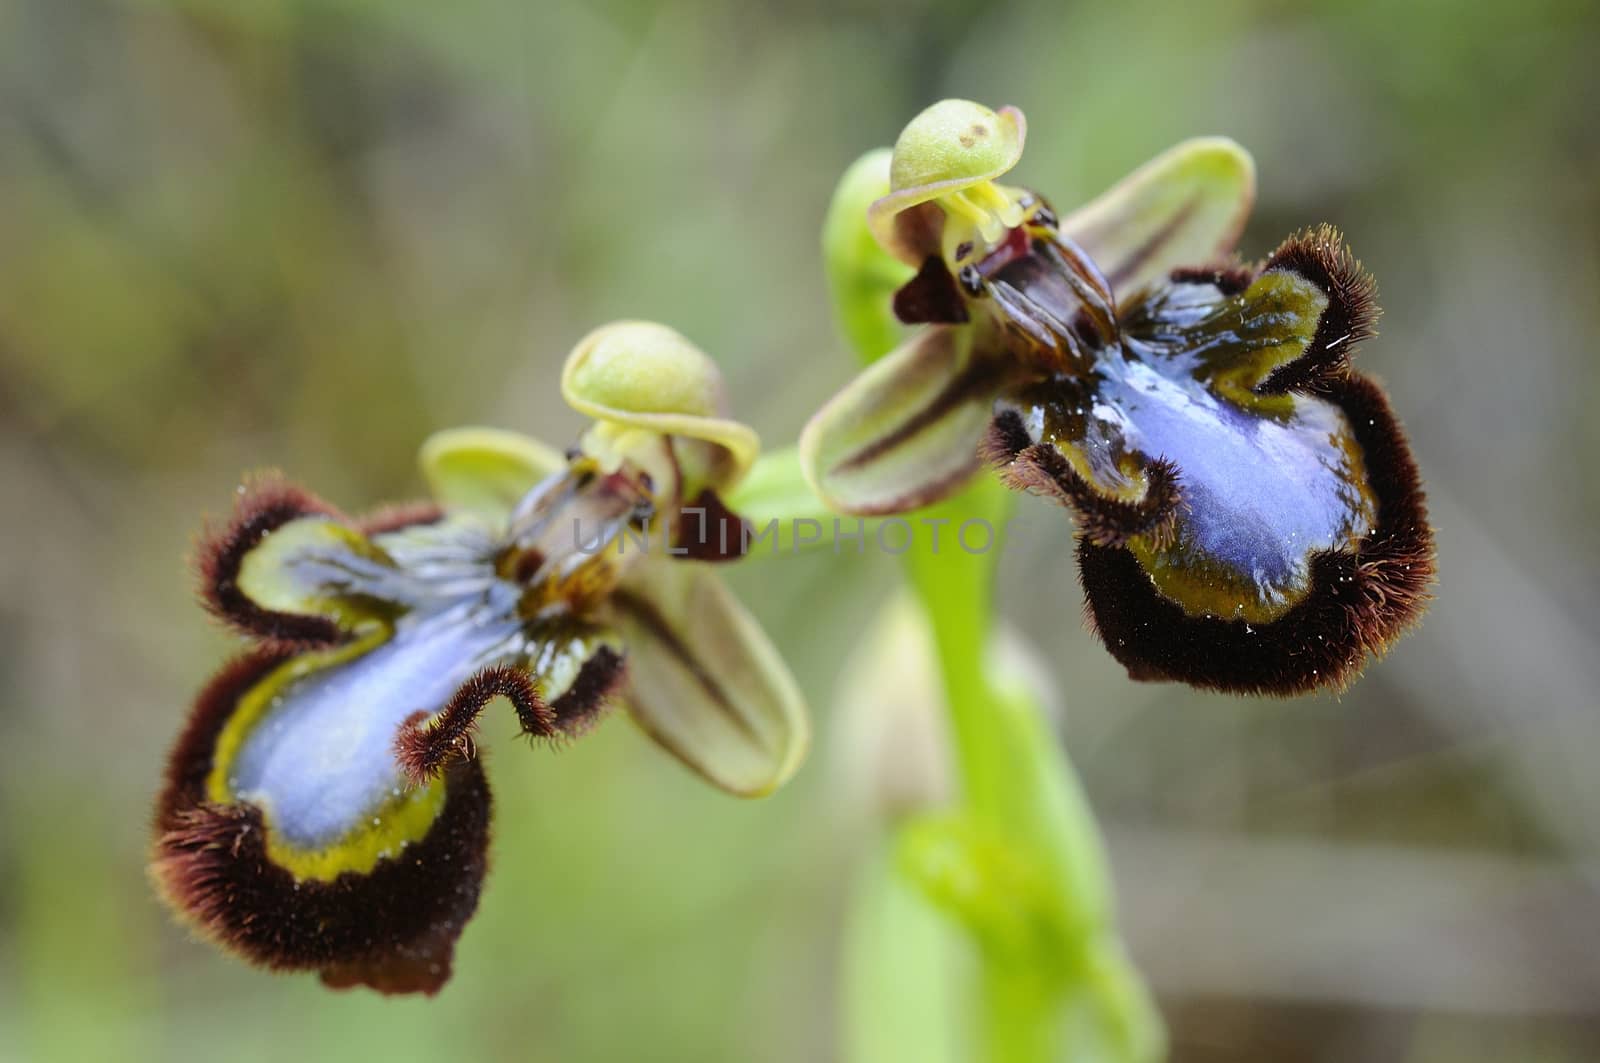 Wild orchid from southern Western Europe, Ophrys speculum by jalonsohu@gmail.com